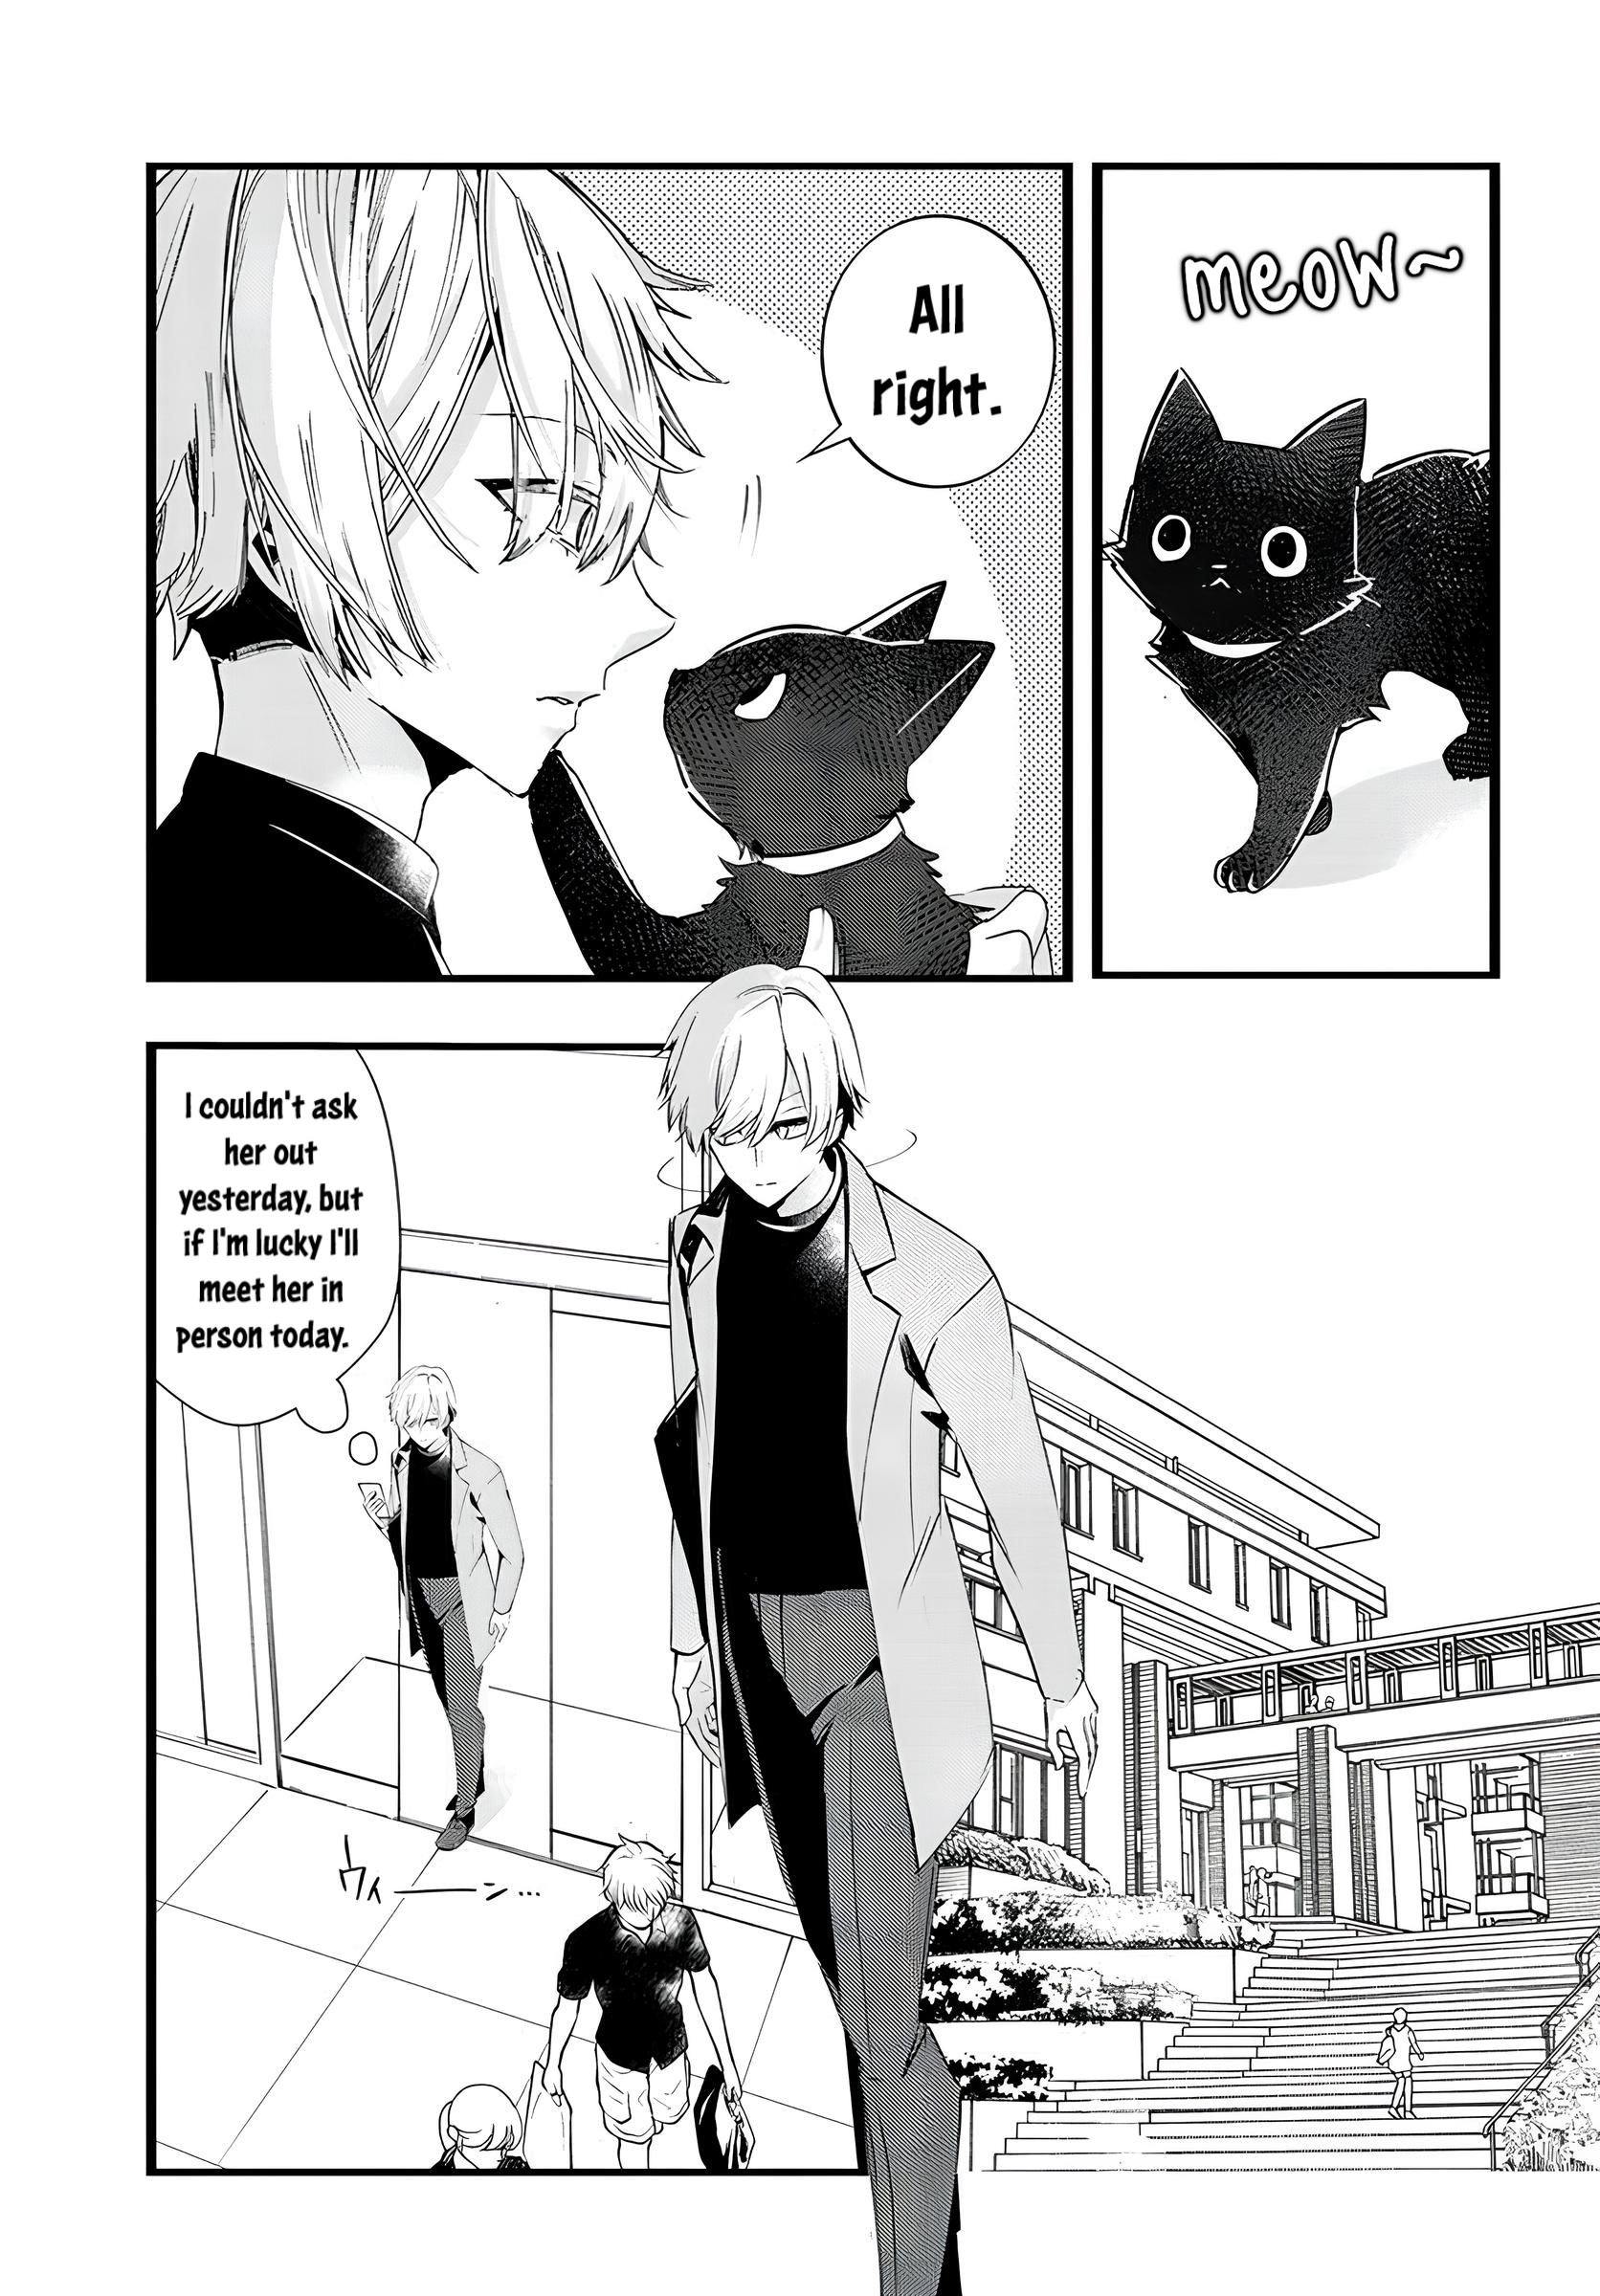 The Cold Beauty At School Became My Pet Cat - Page 1